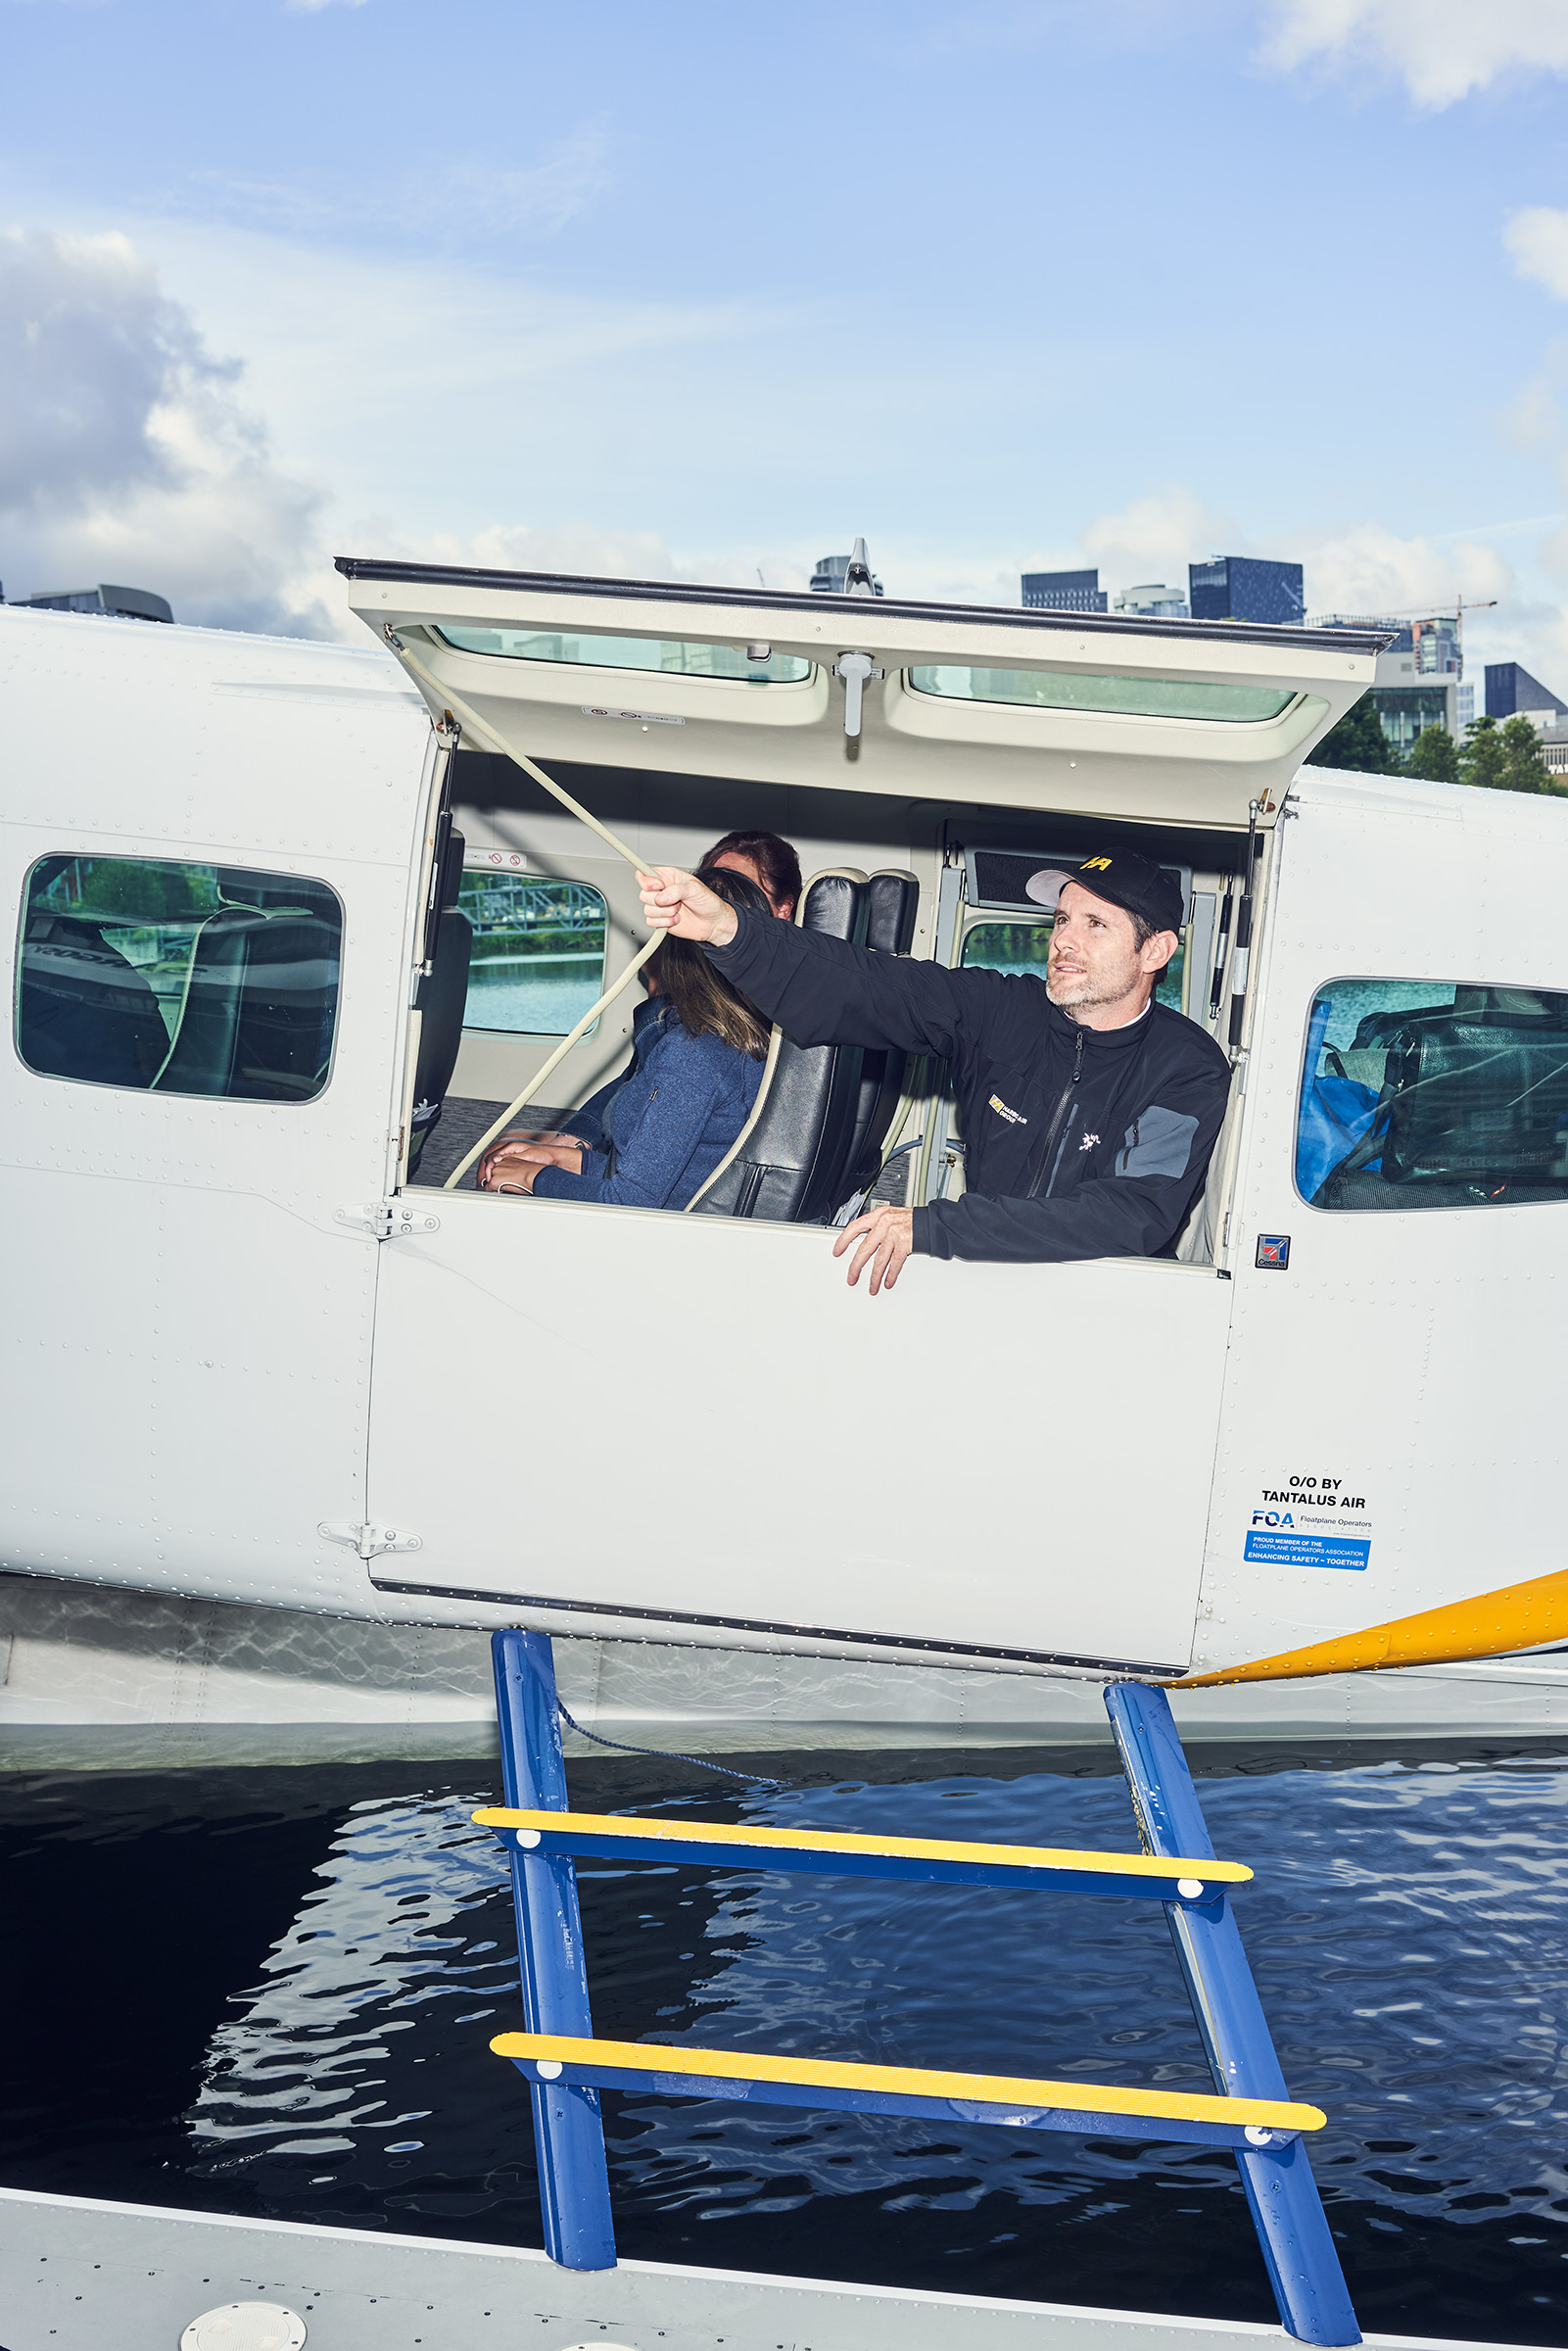 A Harbour Air crew member prepares for take-off on a seaplane flying from Seattle to Vancouver on July 11. When the Vancouver-Seattle route launched last year, tech companies bought tickets in bulk so their employees could go back and forth between Canada and the United States easily. (Ian Allen for TIME)